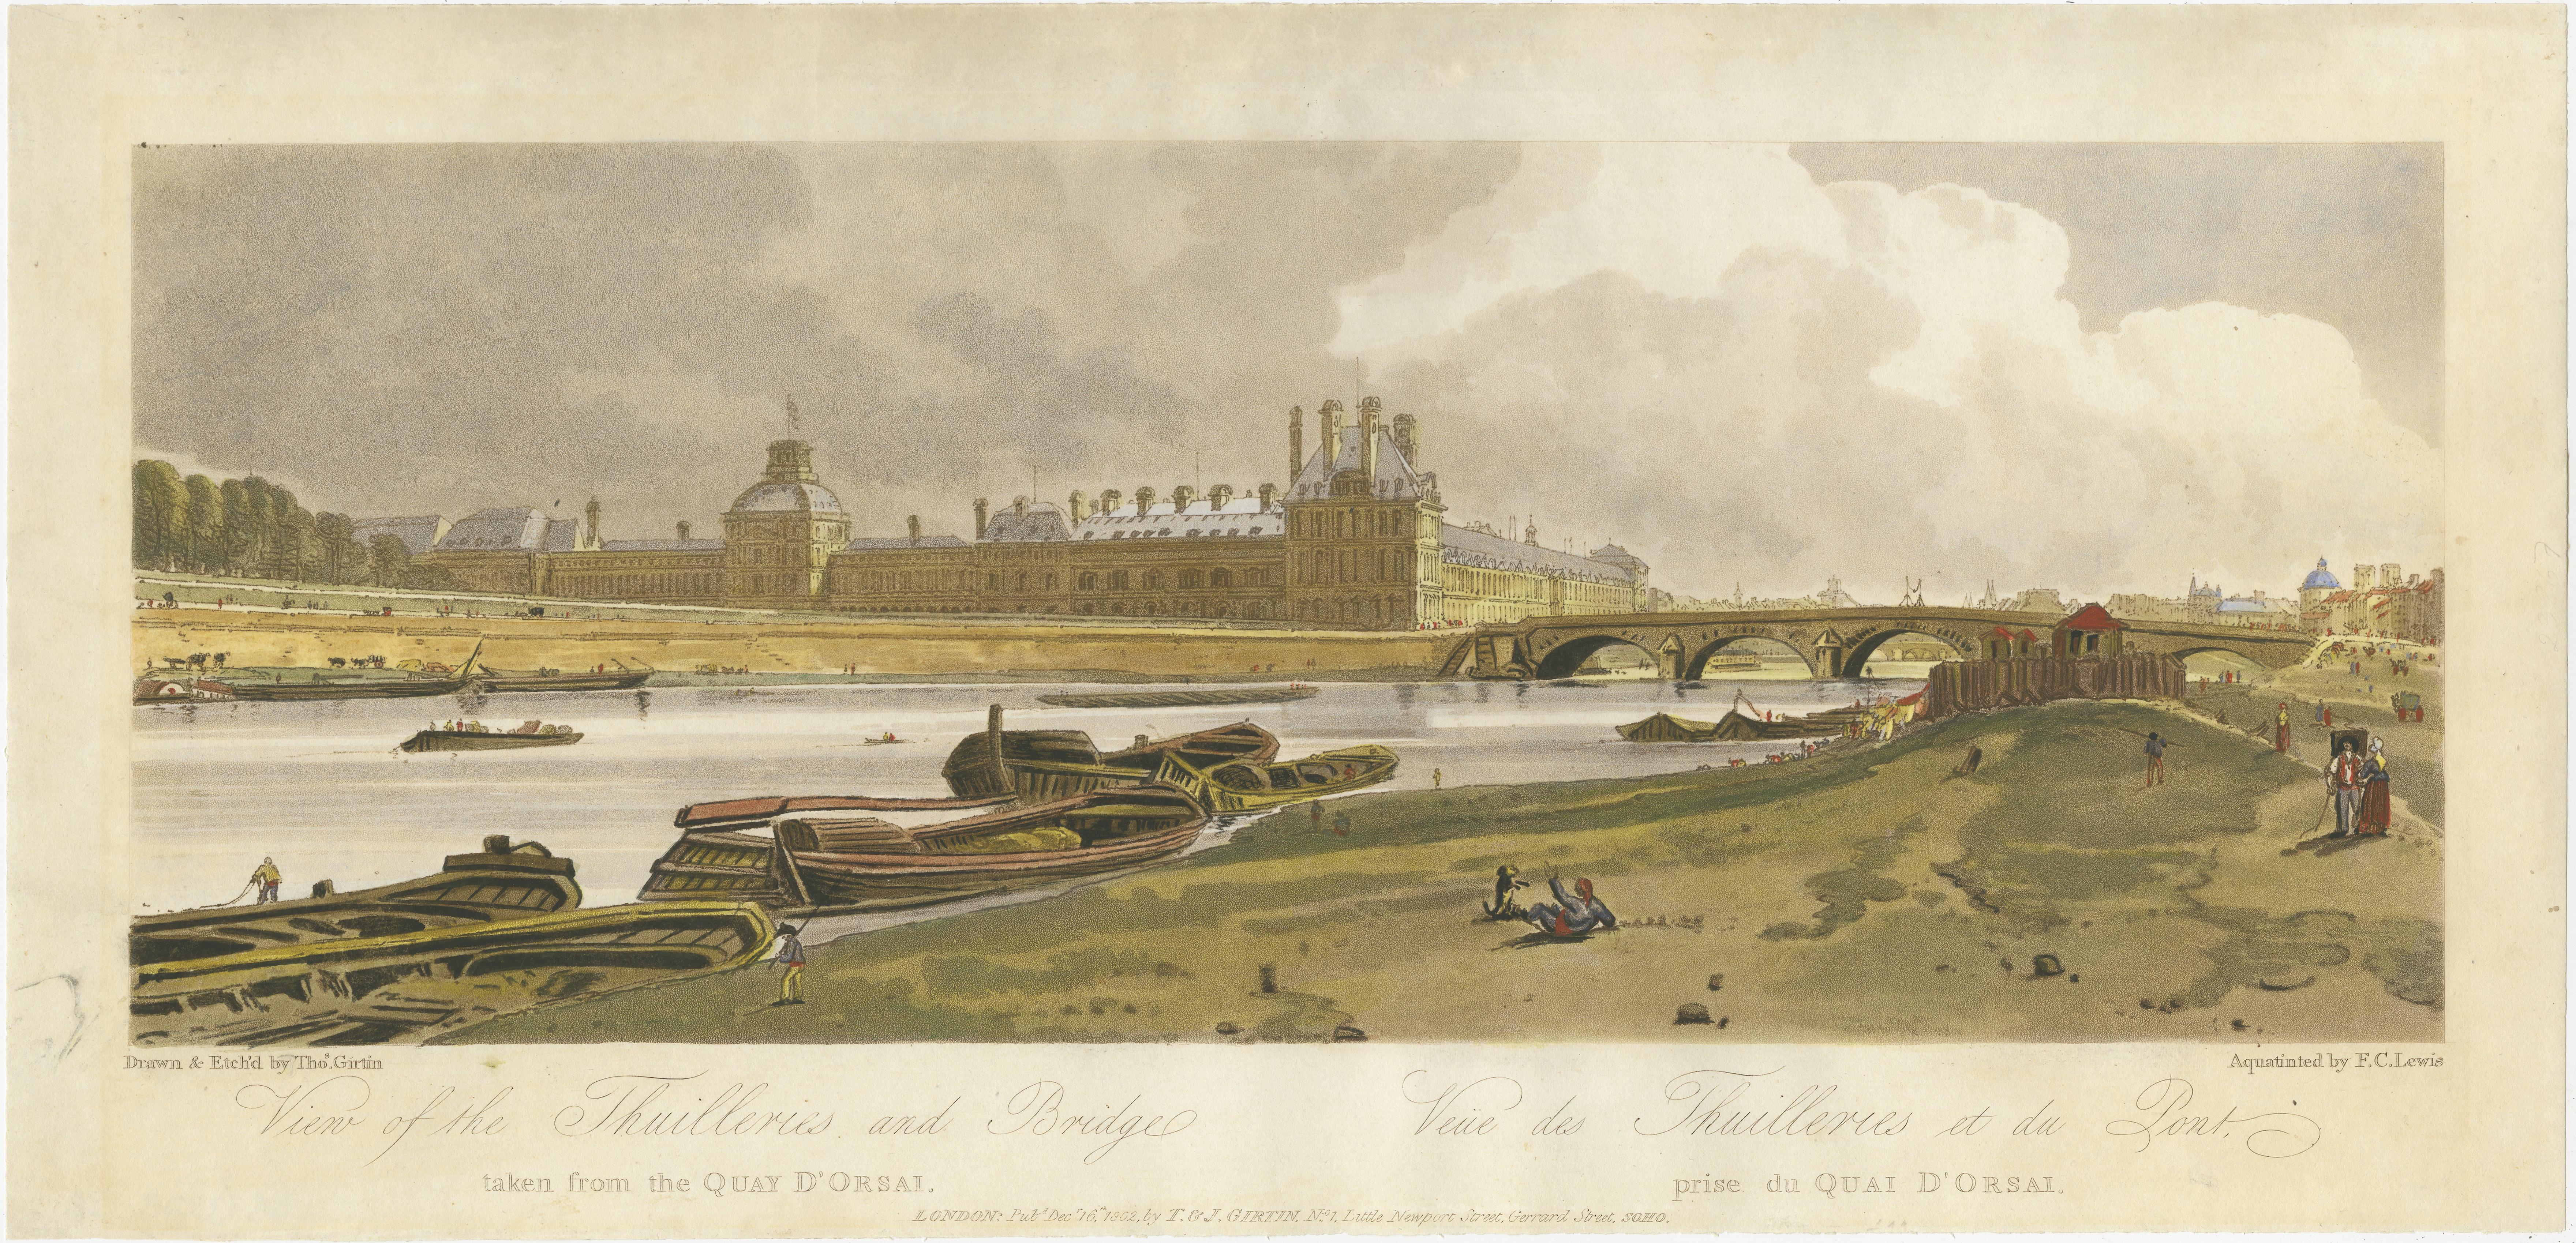 The antique print titled 'View of the Tuileries and Bridge' presents a picturesque view of the Tuileries Palace, a historic royal and imperial palace situated on the right bank of the River Seine in Paris, France. The palace was known for its